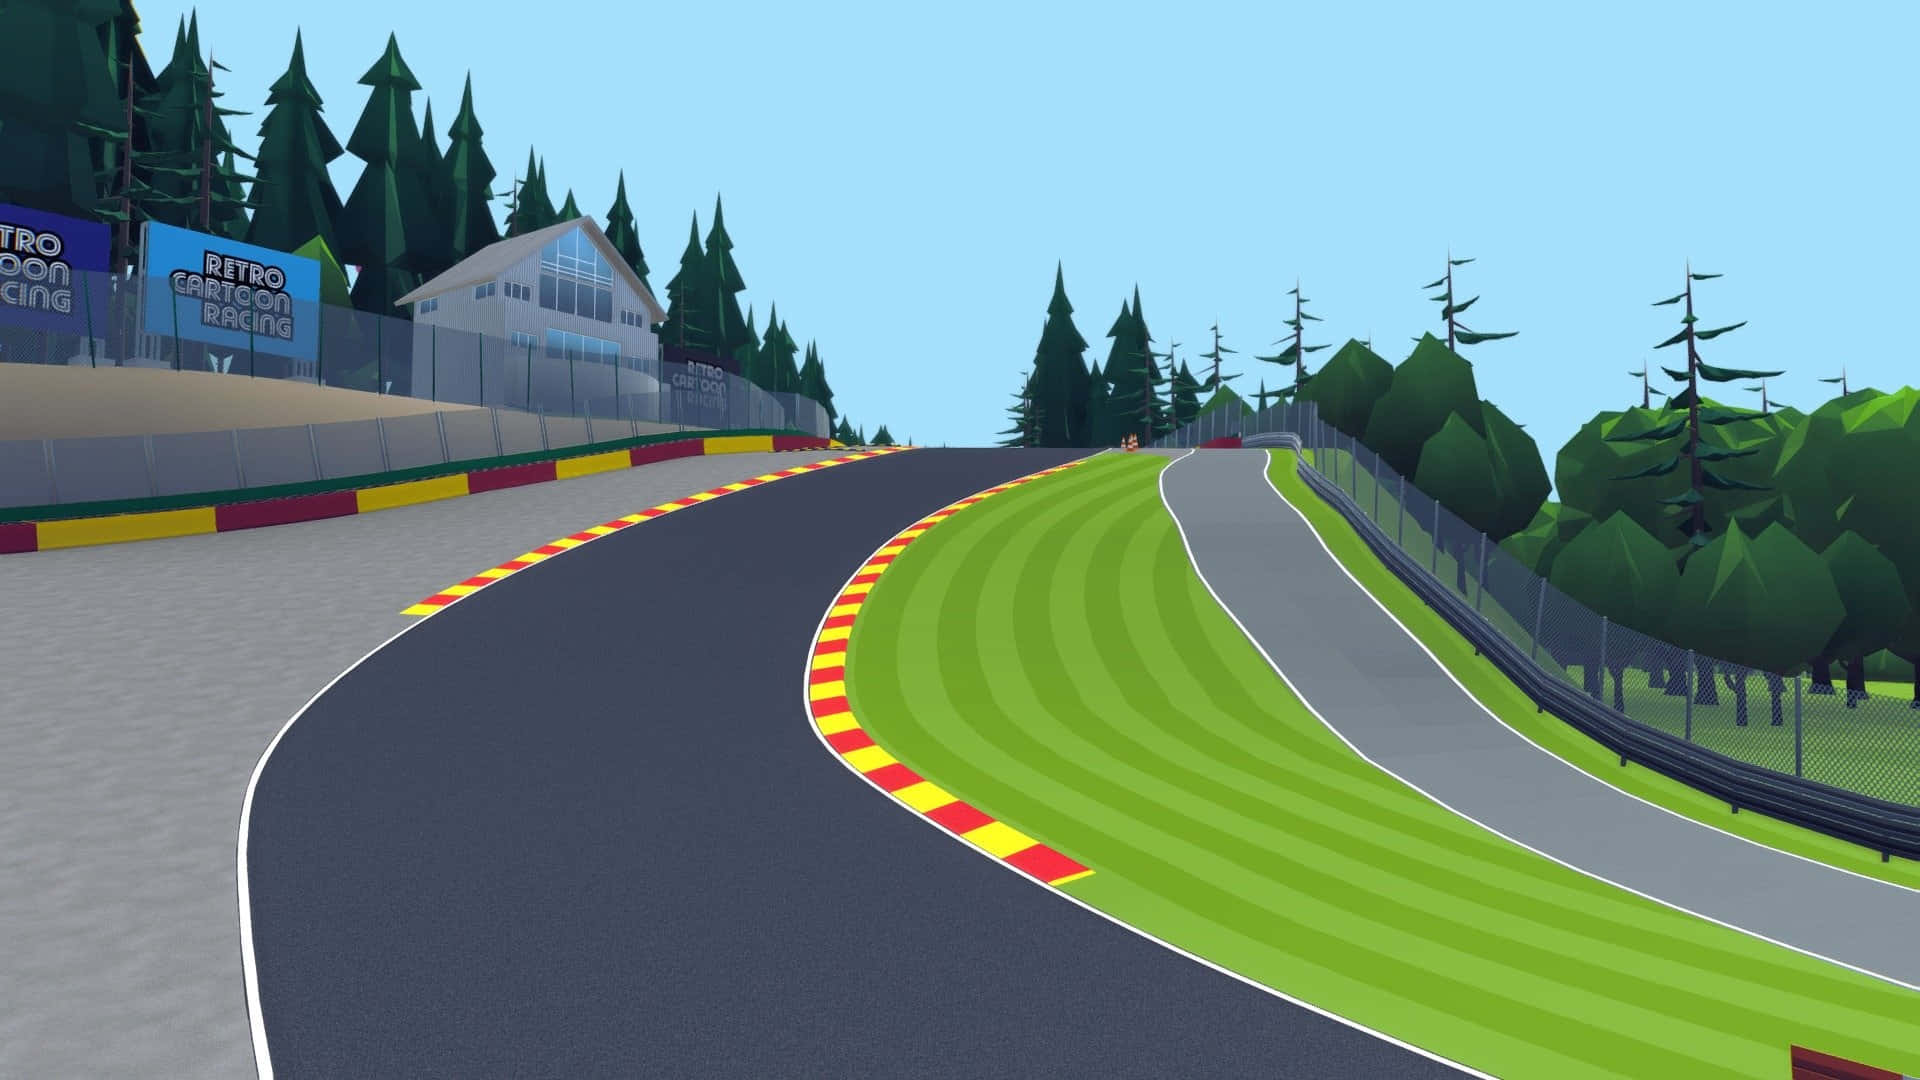 A Cartoon Of A Race Track With Trees And Grass